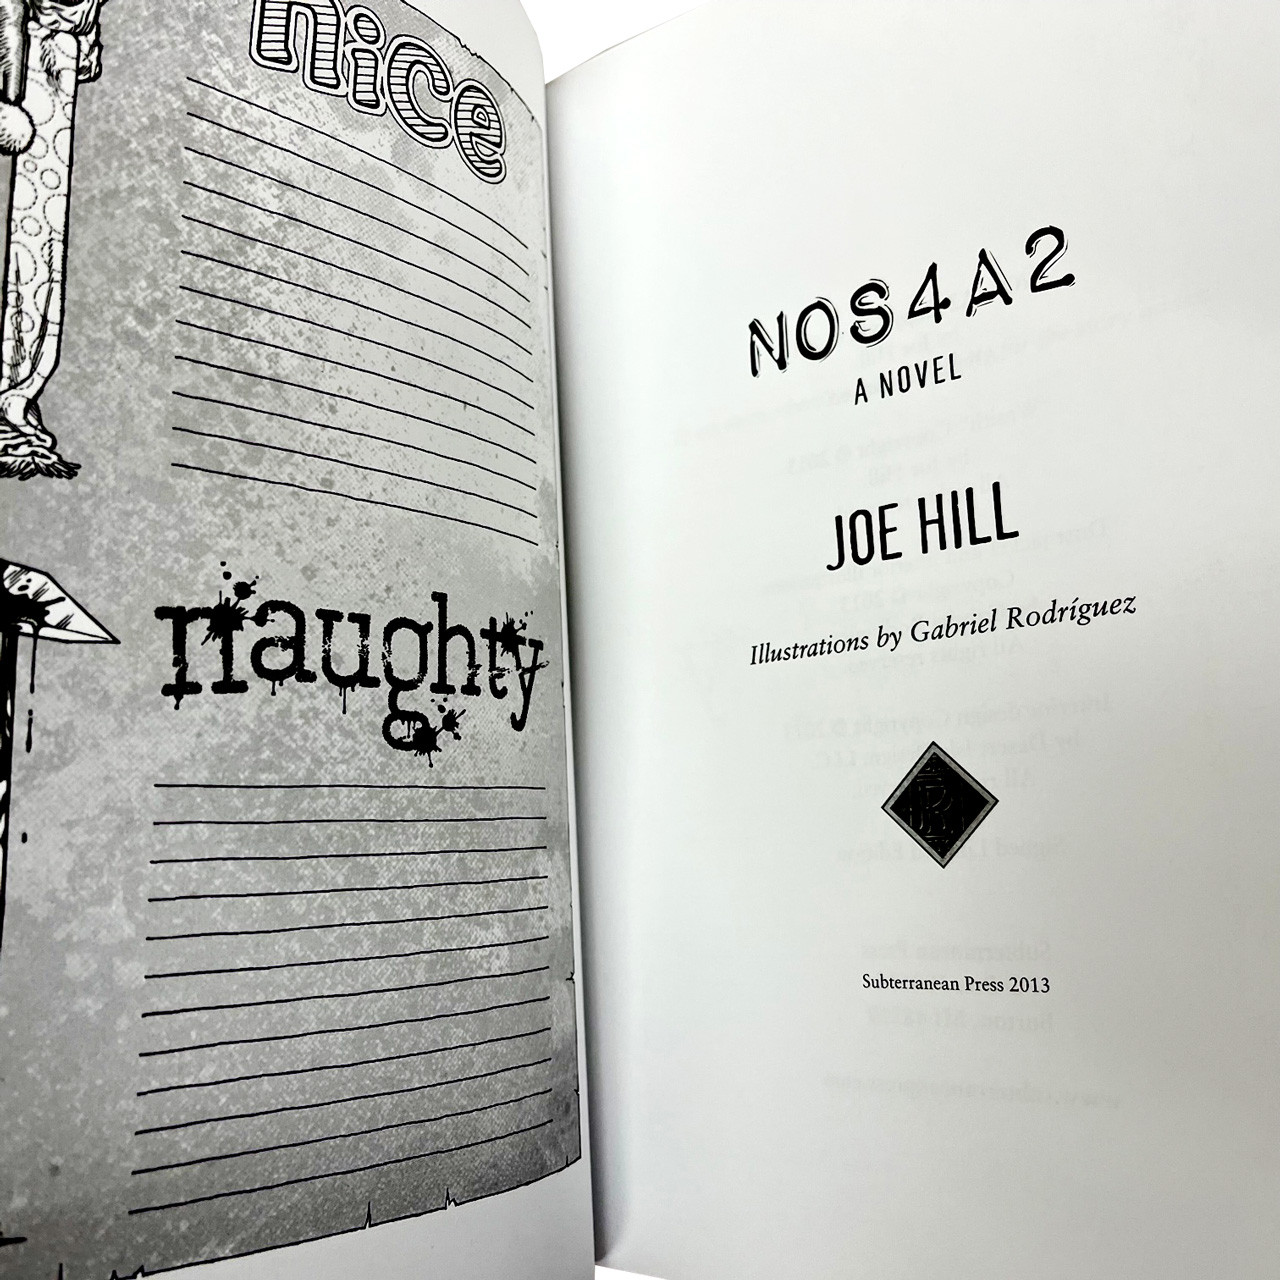 Joe Hill "NOS4A2" Slipcased Signed Limited Edition No. 159 of 750 [Very Fine]